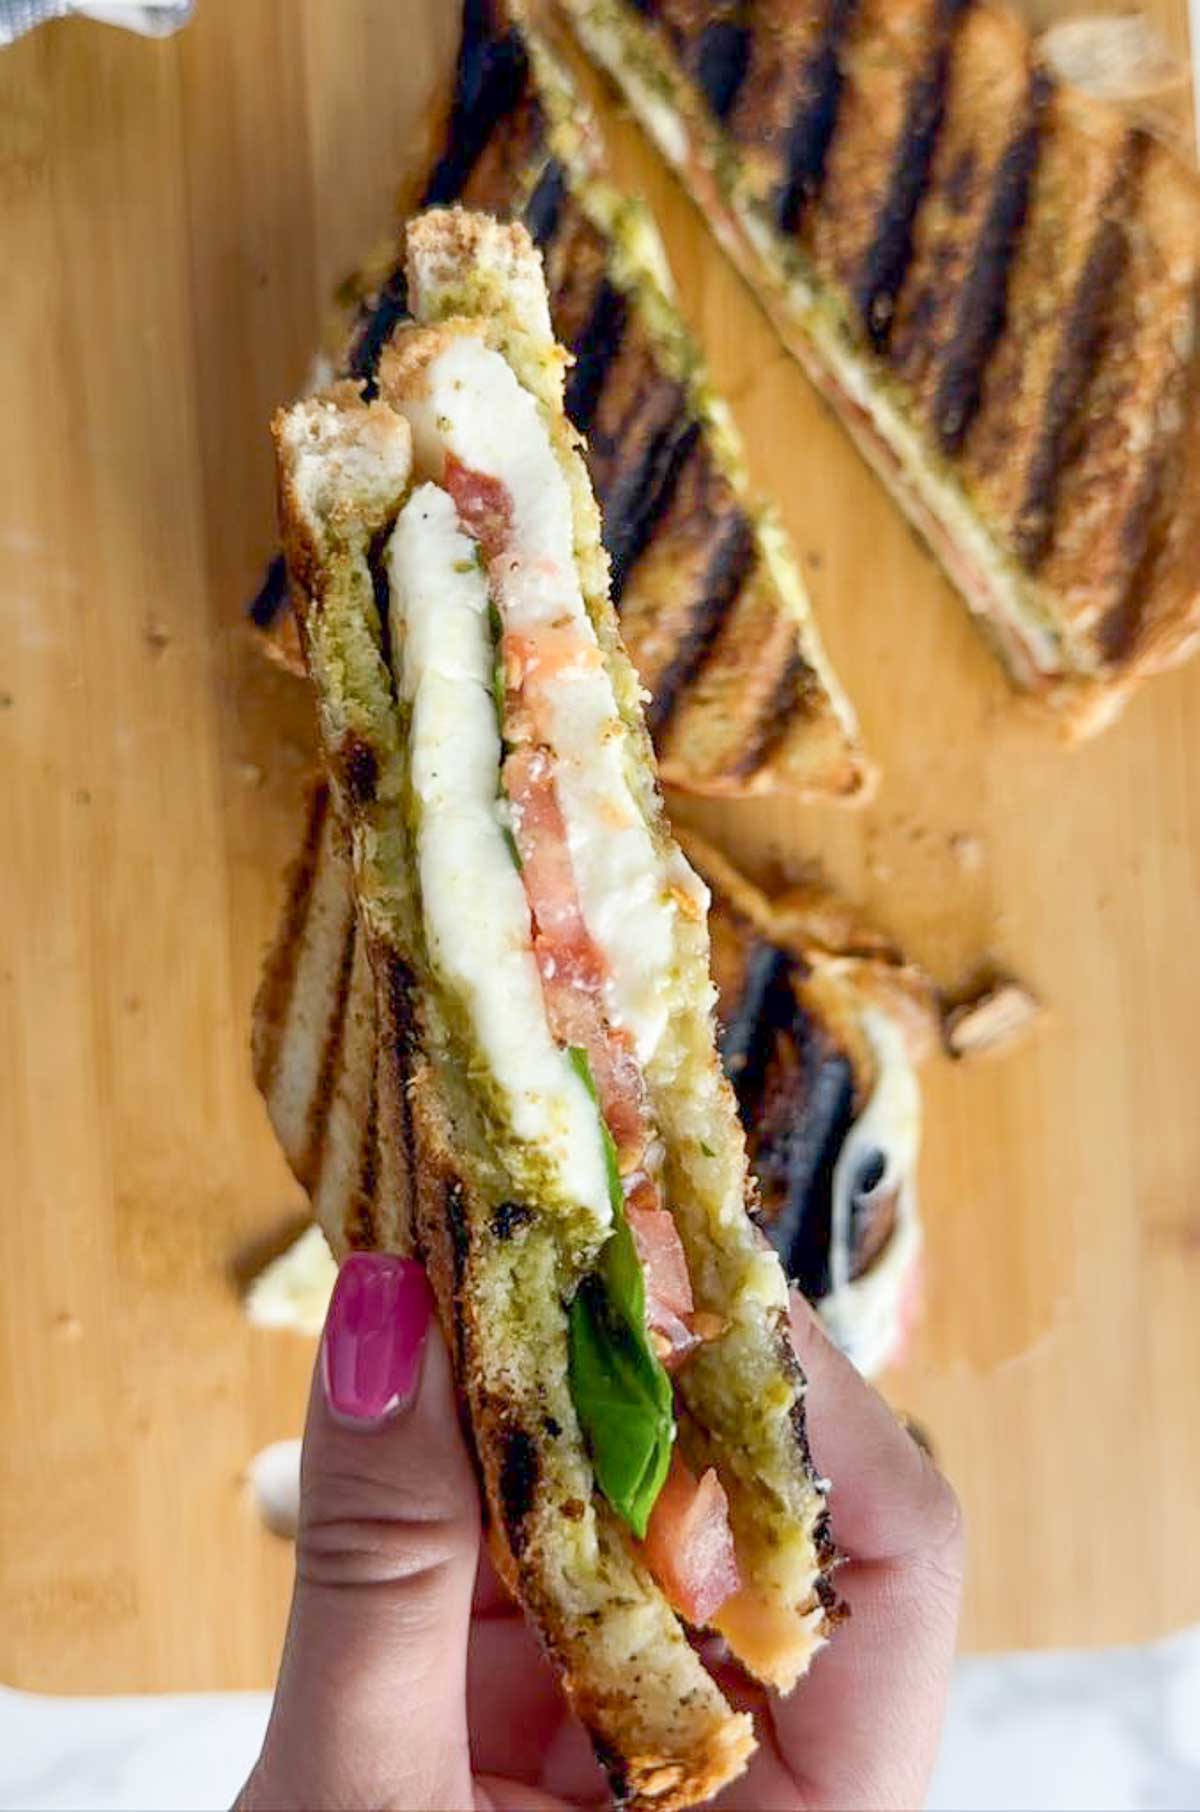 This caprese panini sandwich with pesto features ooey, gooey mozzarella cheese, sweet tomato slices, fragrant basil, and bright herby pesto pressed between two slices of golden brown bread. The perfect easy lunch or dinner!